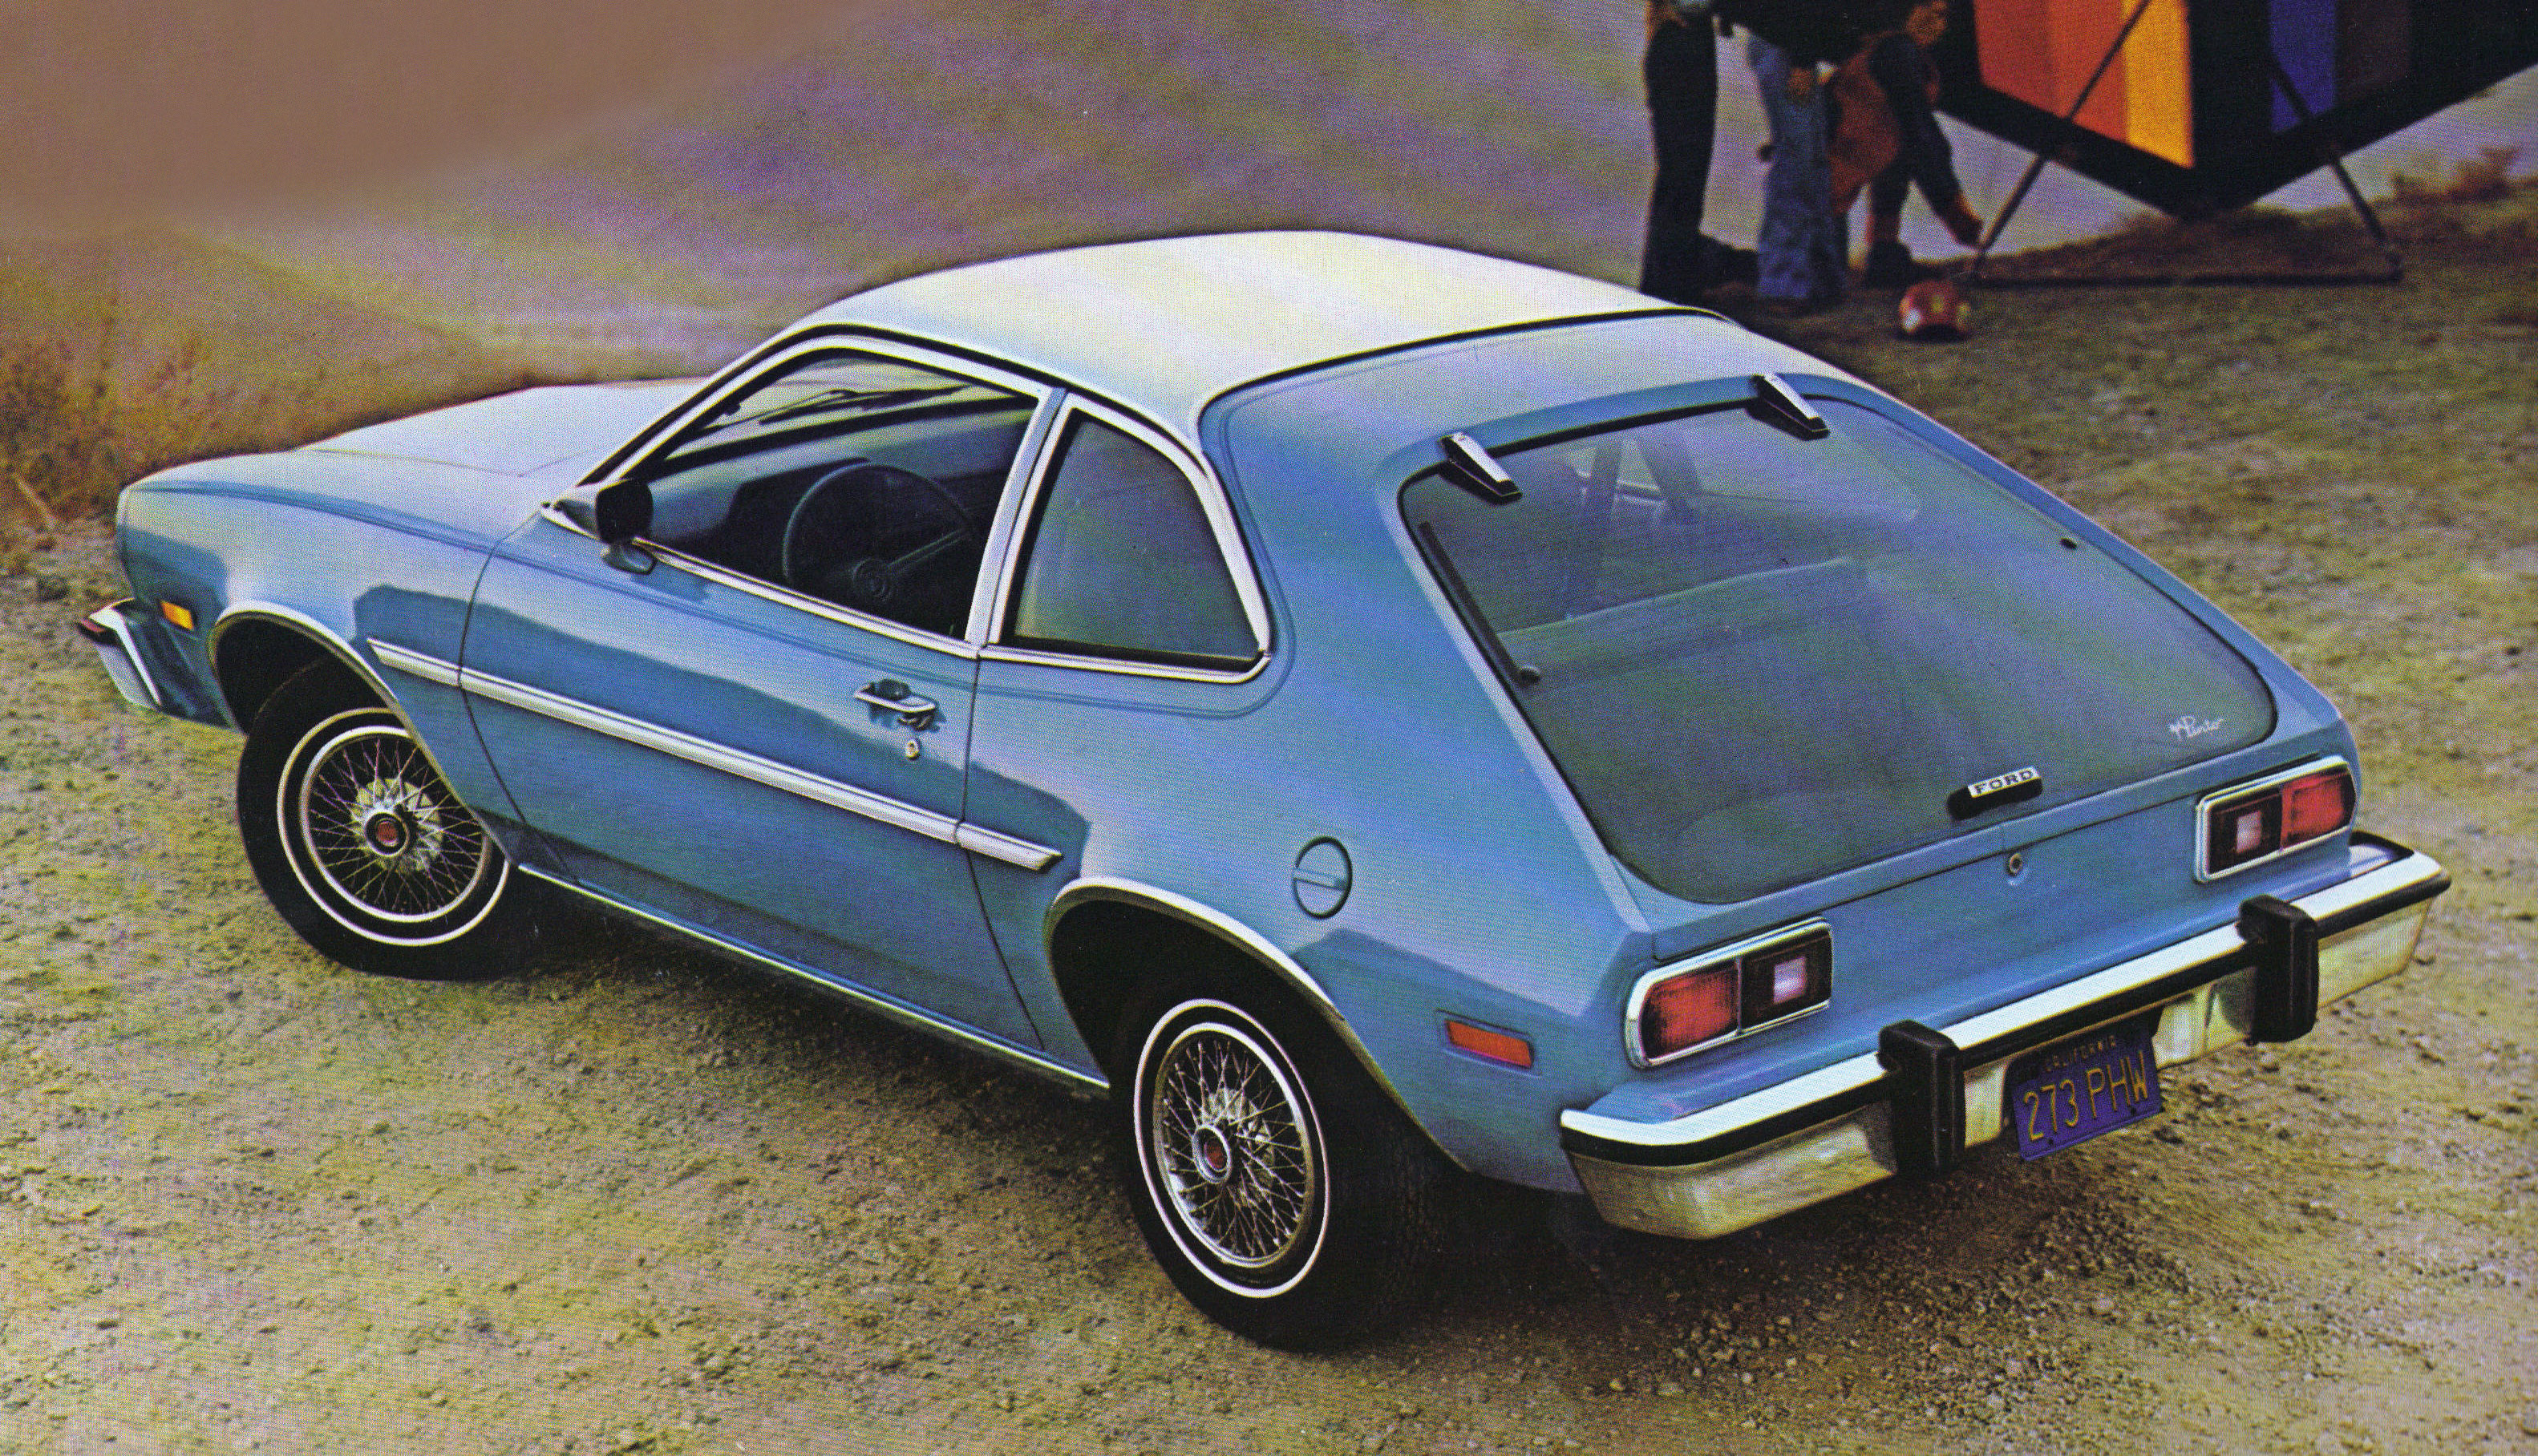 High Resolution Wallpaper | Ford Pinto 3165x1816 px